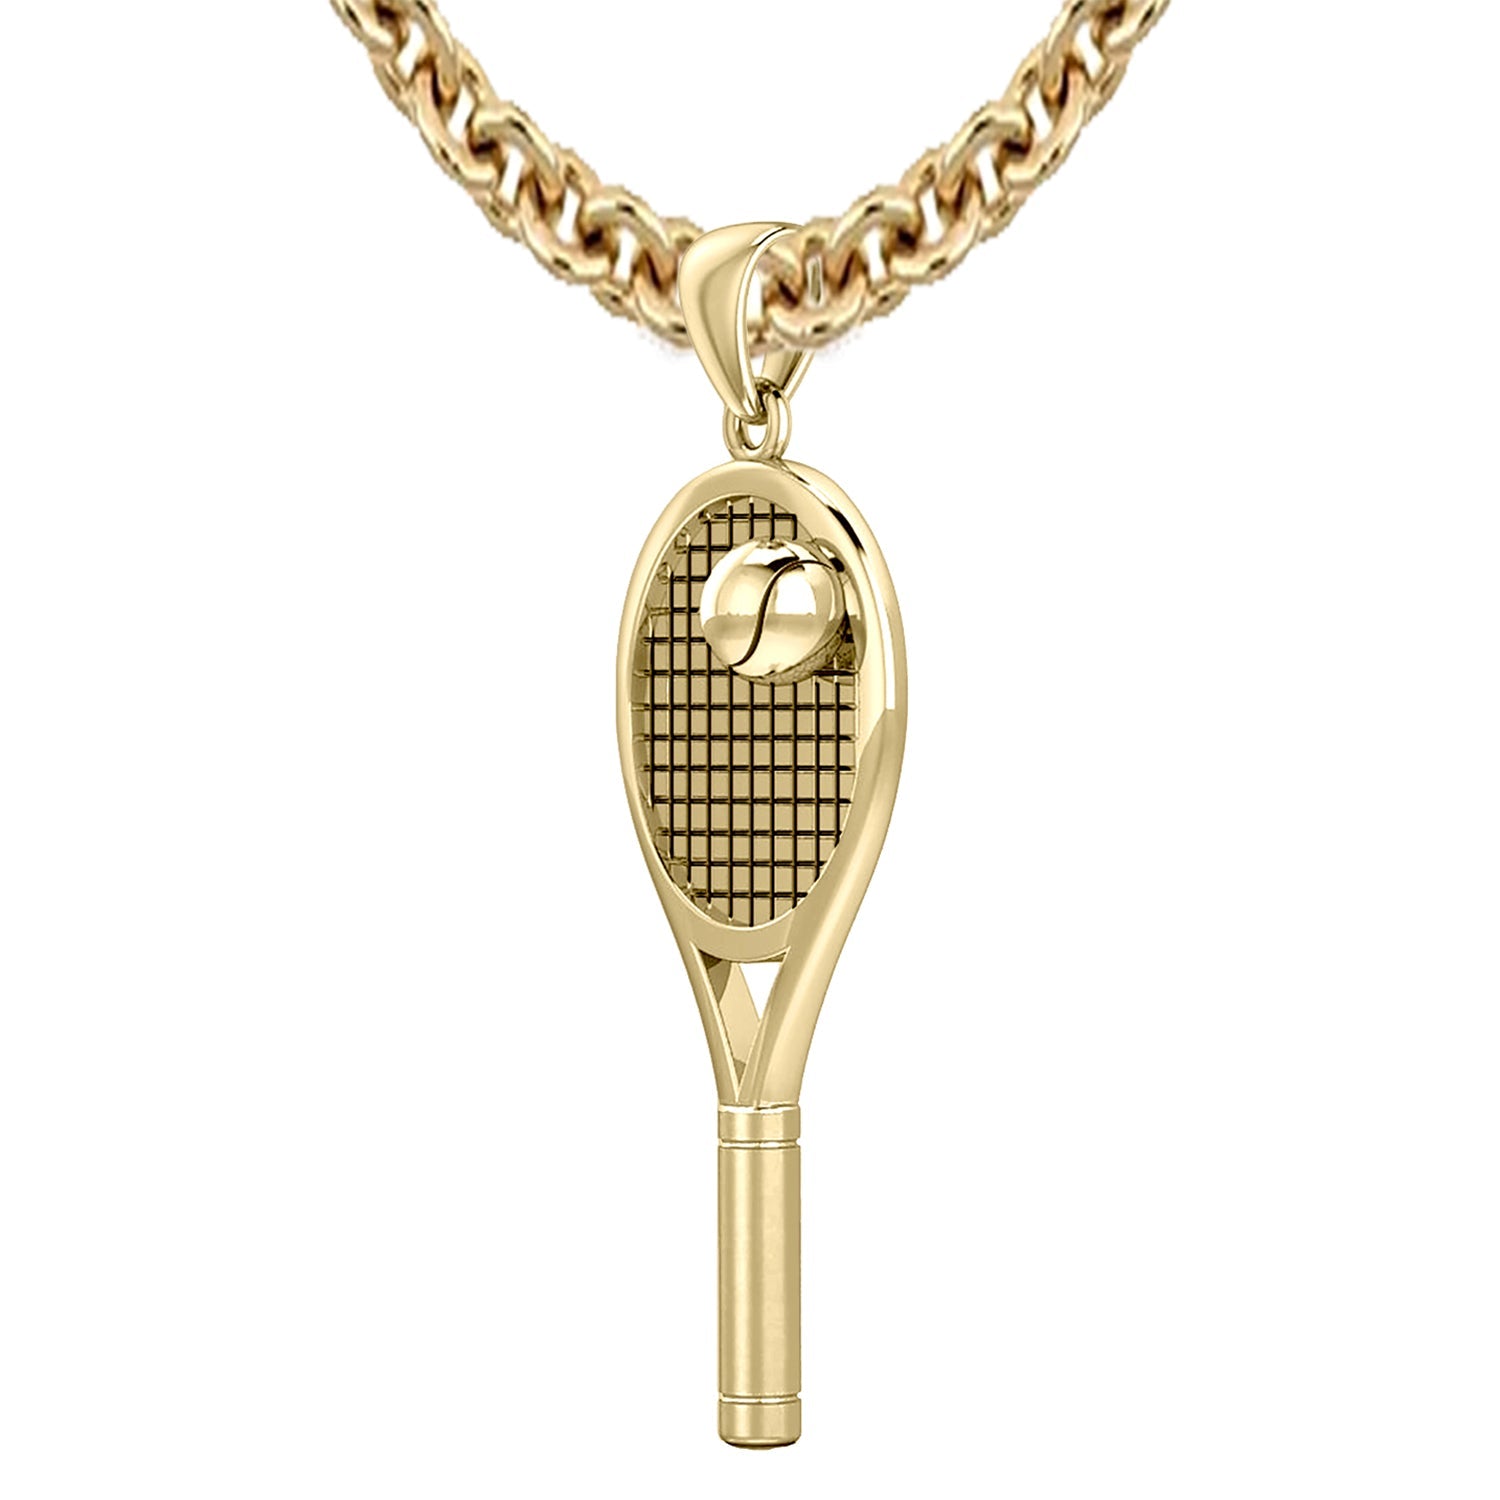 Large 10K or 14K Yellow Gold 3D Tennis Racket & Ball Pendant Necklace, 42mm  - 10k Yellow Gold / 20in, 3mm Cable Chain